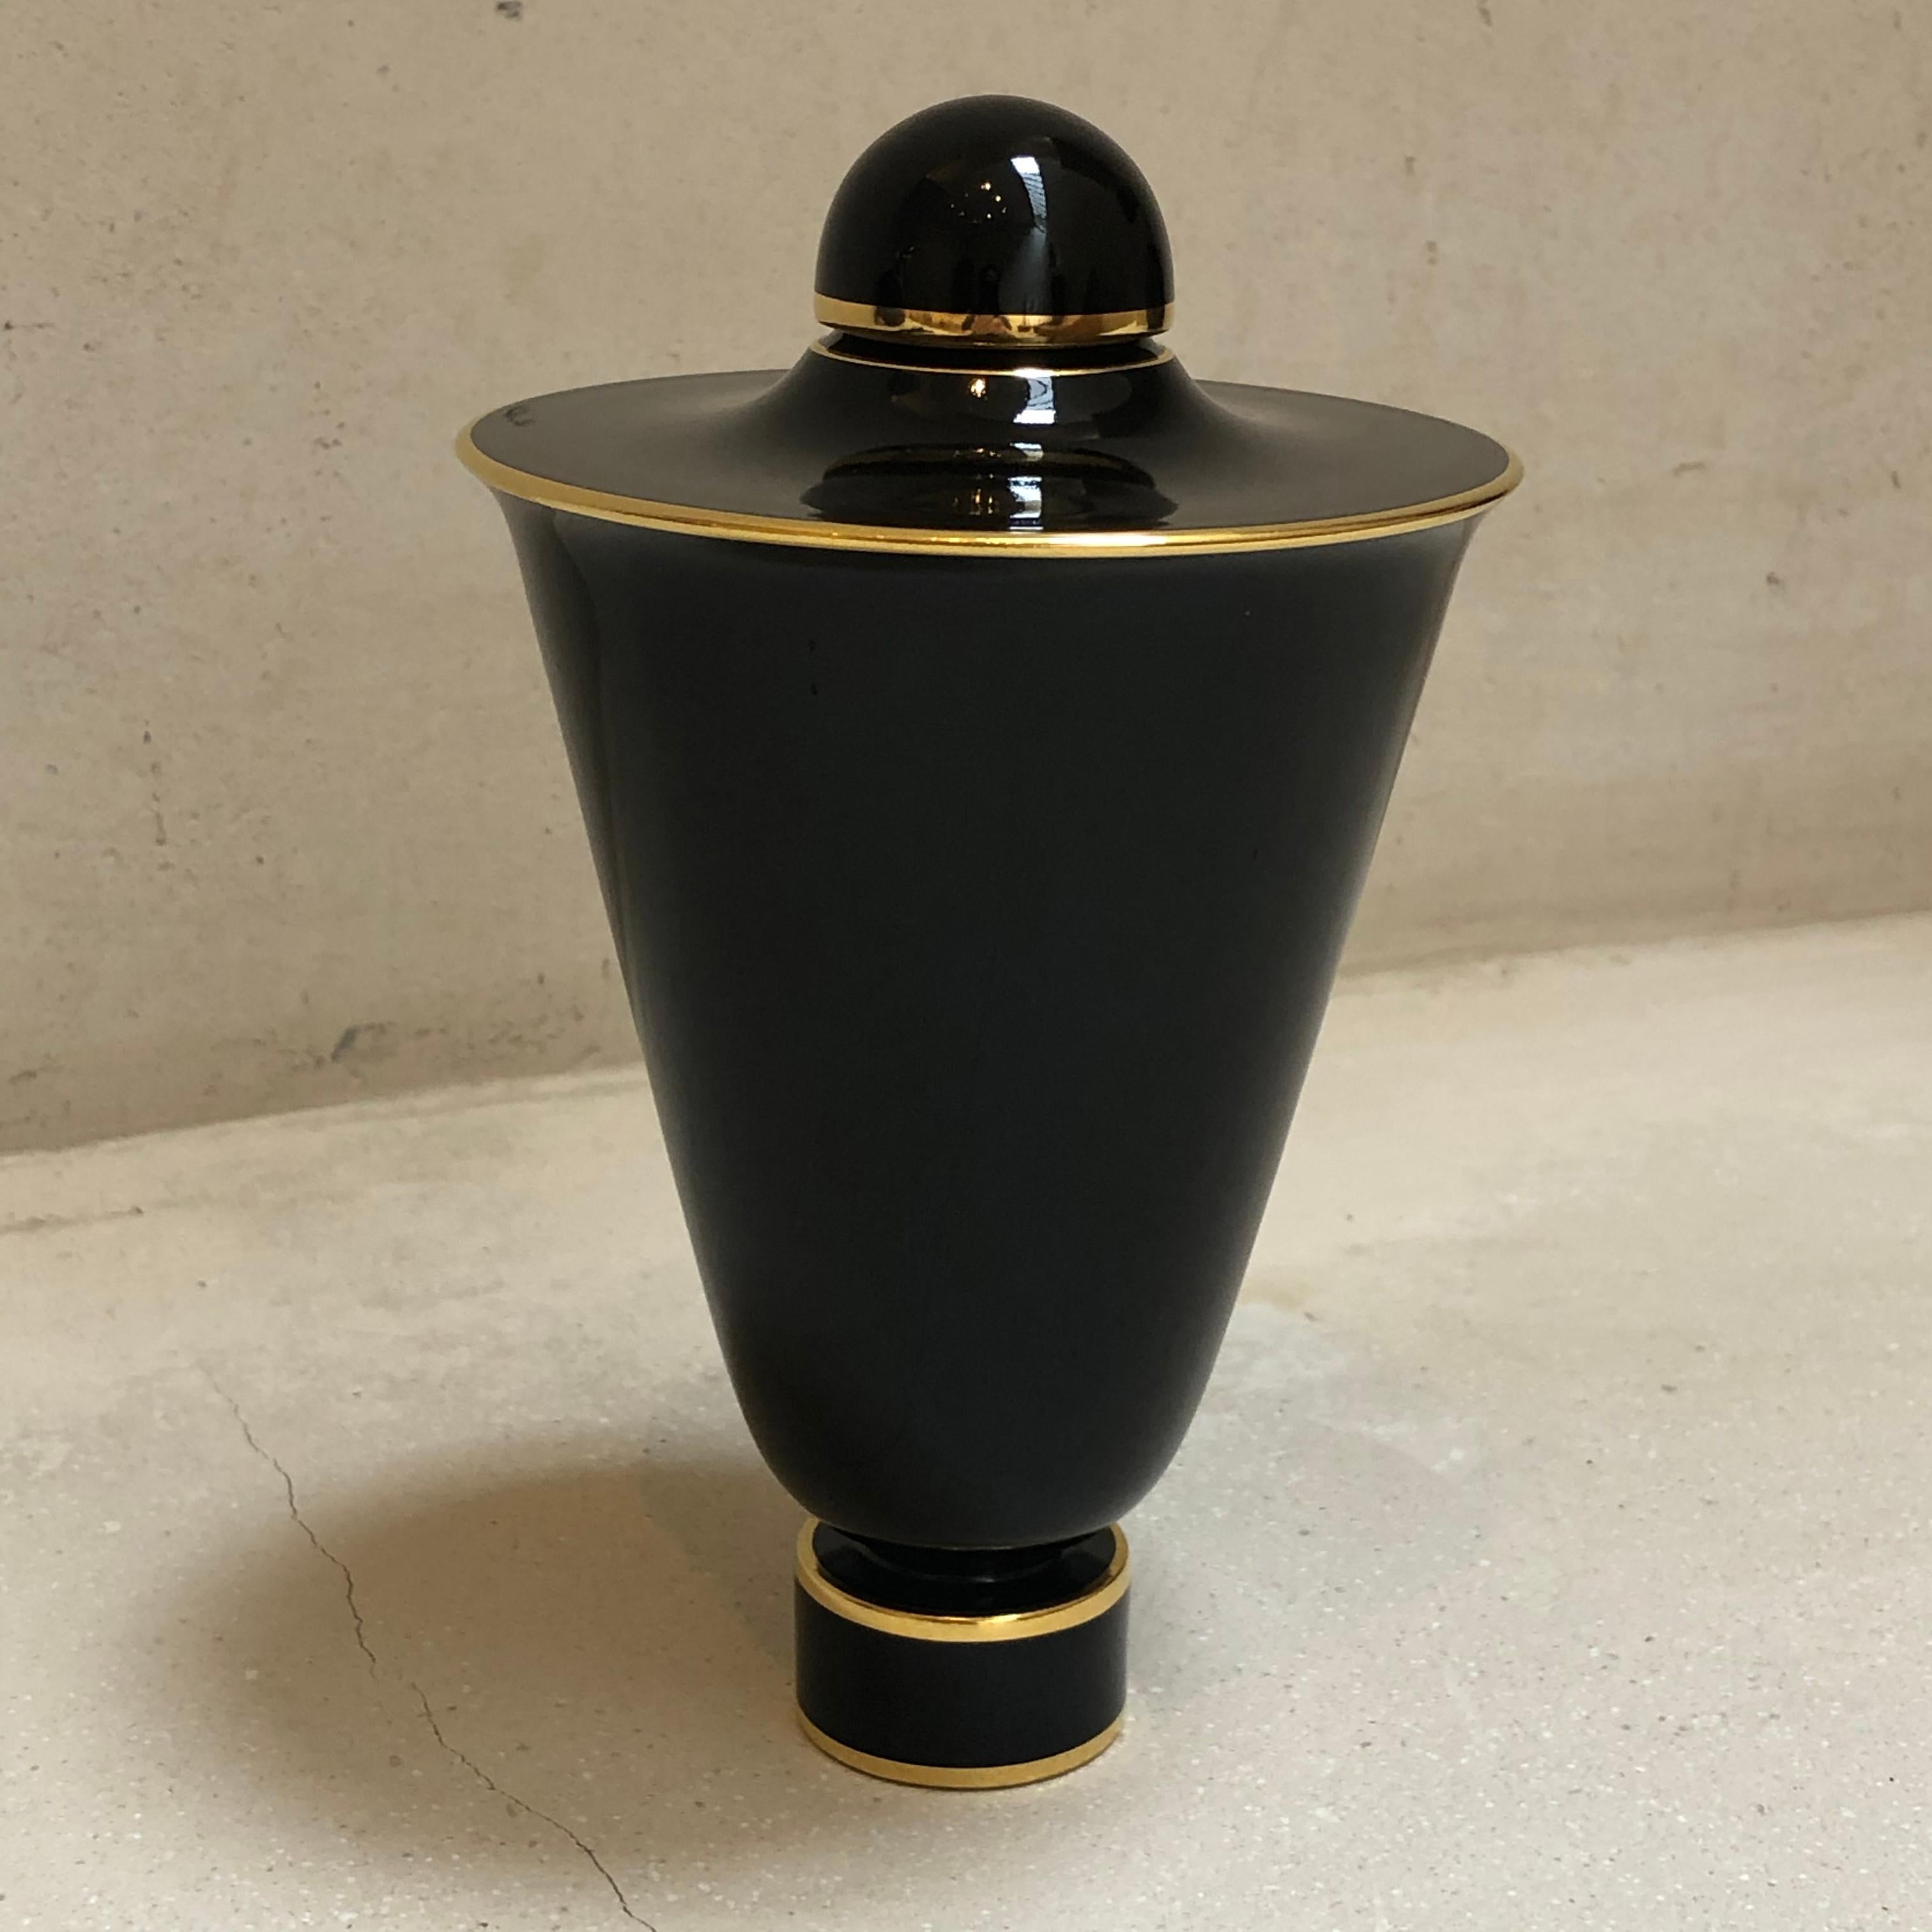 This vase was designed in the 1920s by Émile-Jacques Ruhlmann for the Manufacture Royale de Sèvres. The cone-shaped body of the vase is mounted on a circular foot hand-painted. The deep blue of Sèvres color pigments or glaze is brought out by the